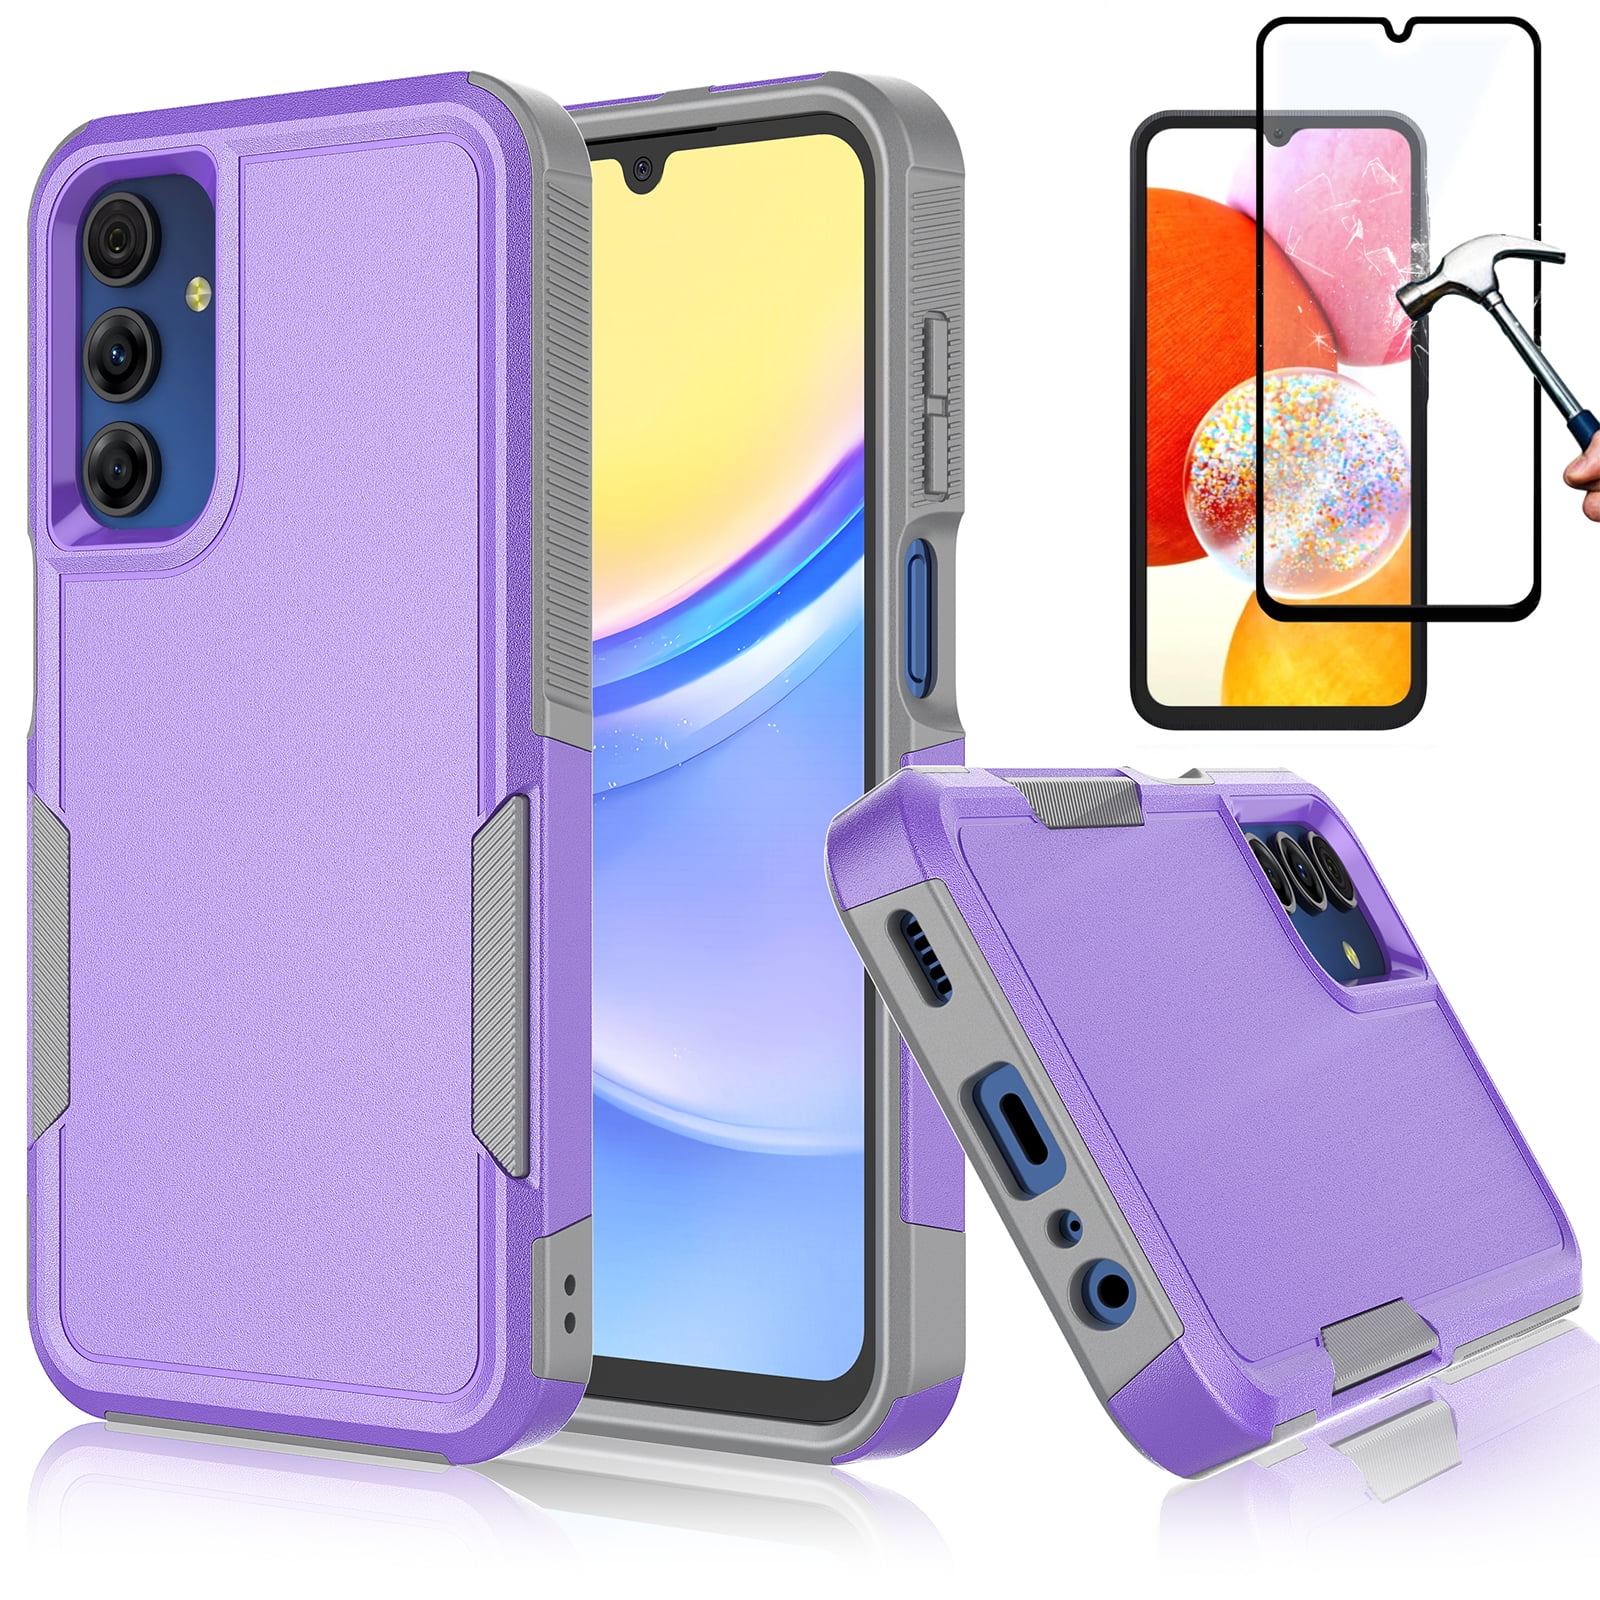  YZKJSZ Case for Samsung Galaxy A15 Cover + Screen Protector  Tempered Glass Protective Film - Soft Gel Black TPU Silicone Protection  Case for Samsung Galaxy A15 (6.4) - KE72 : Cell